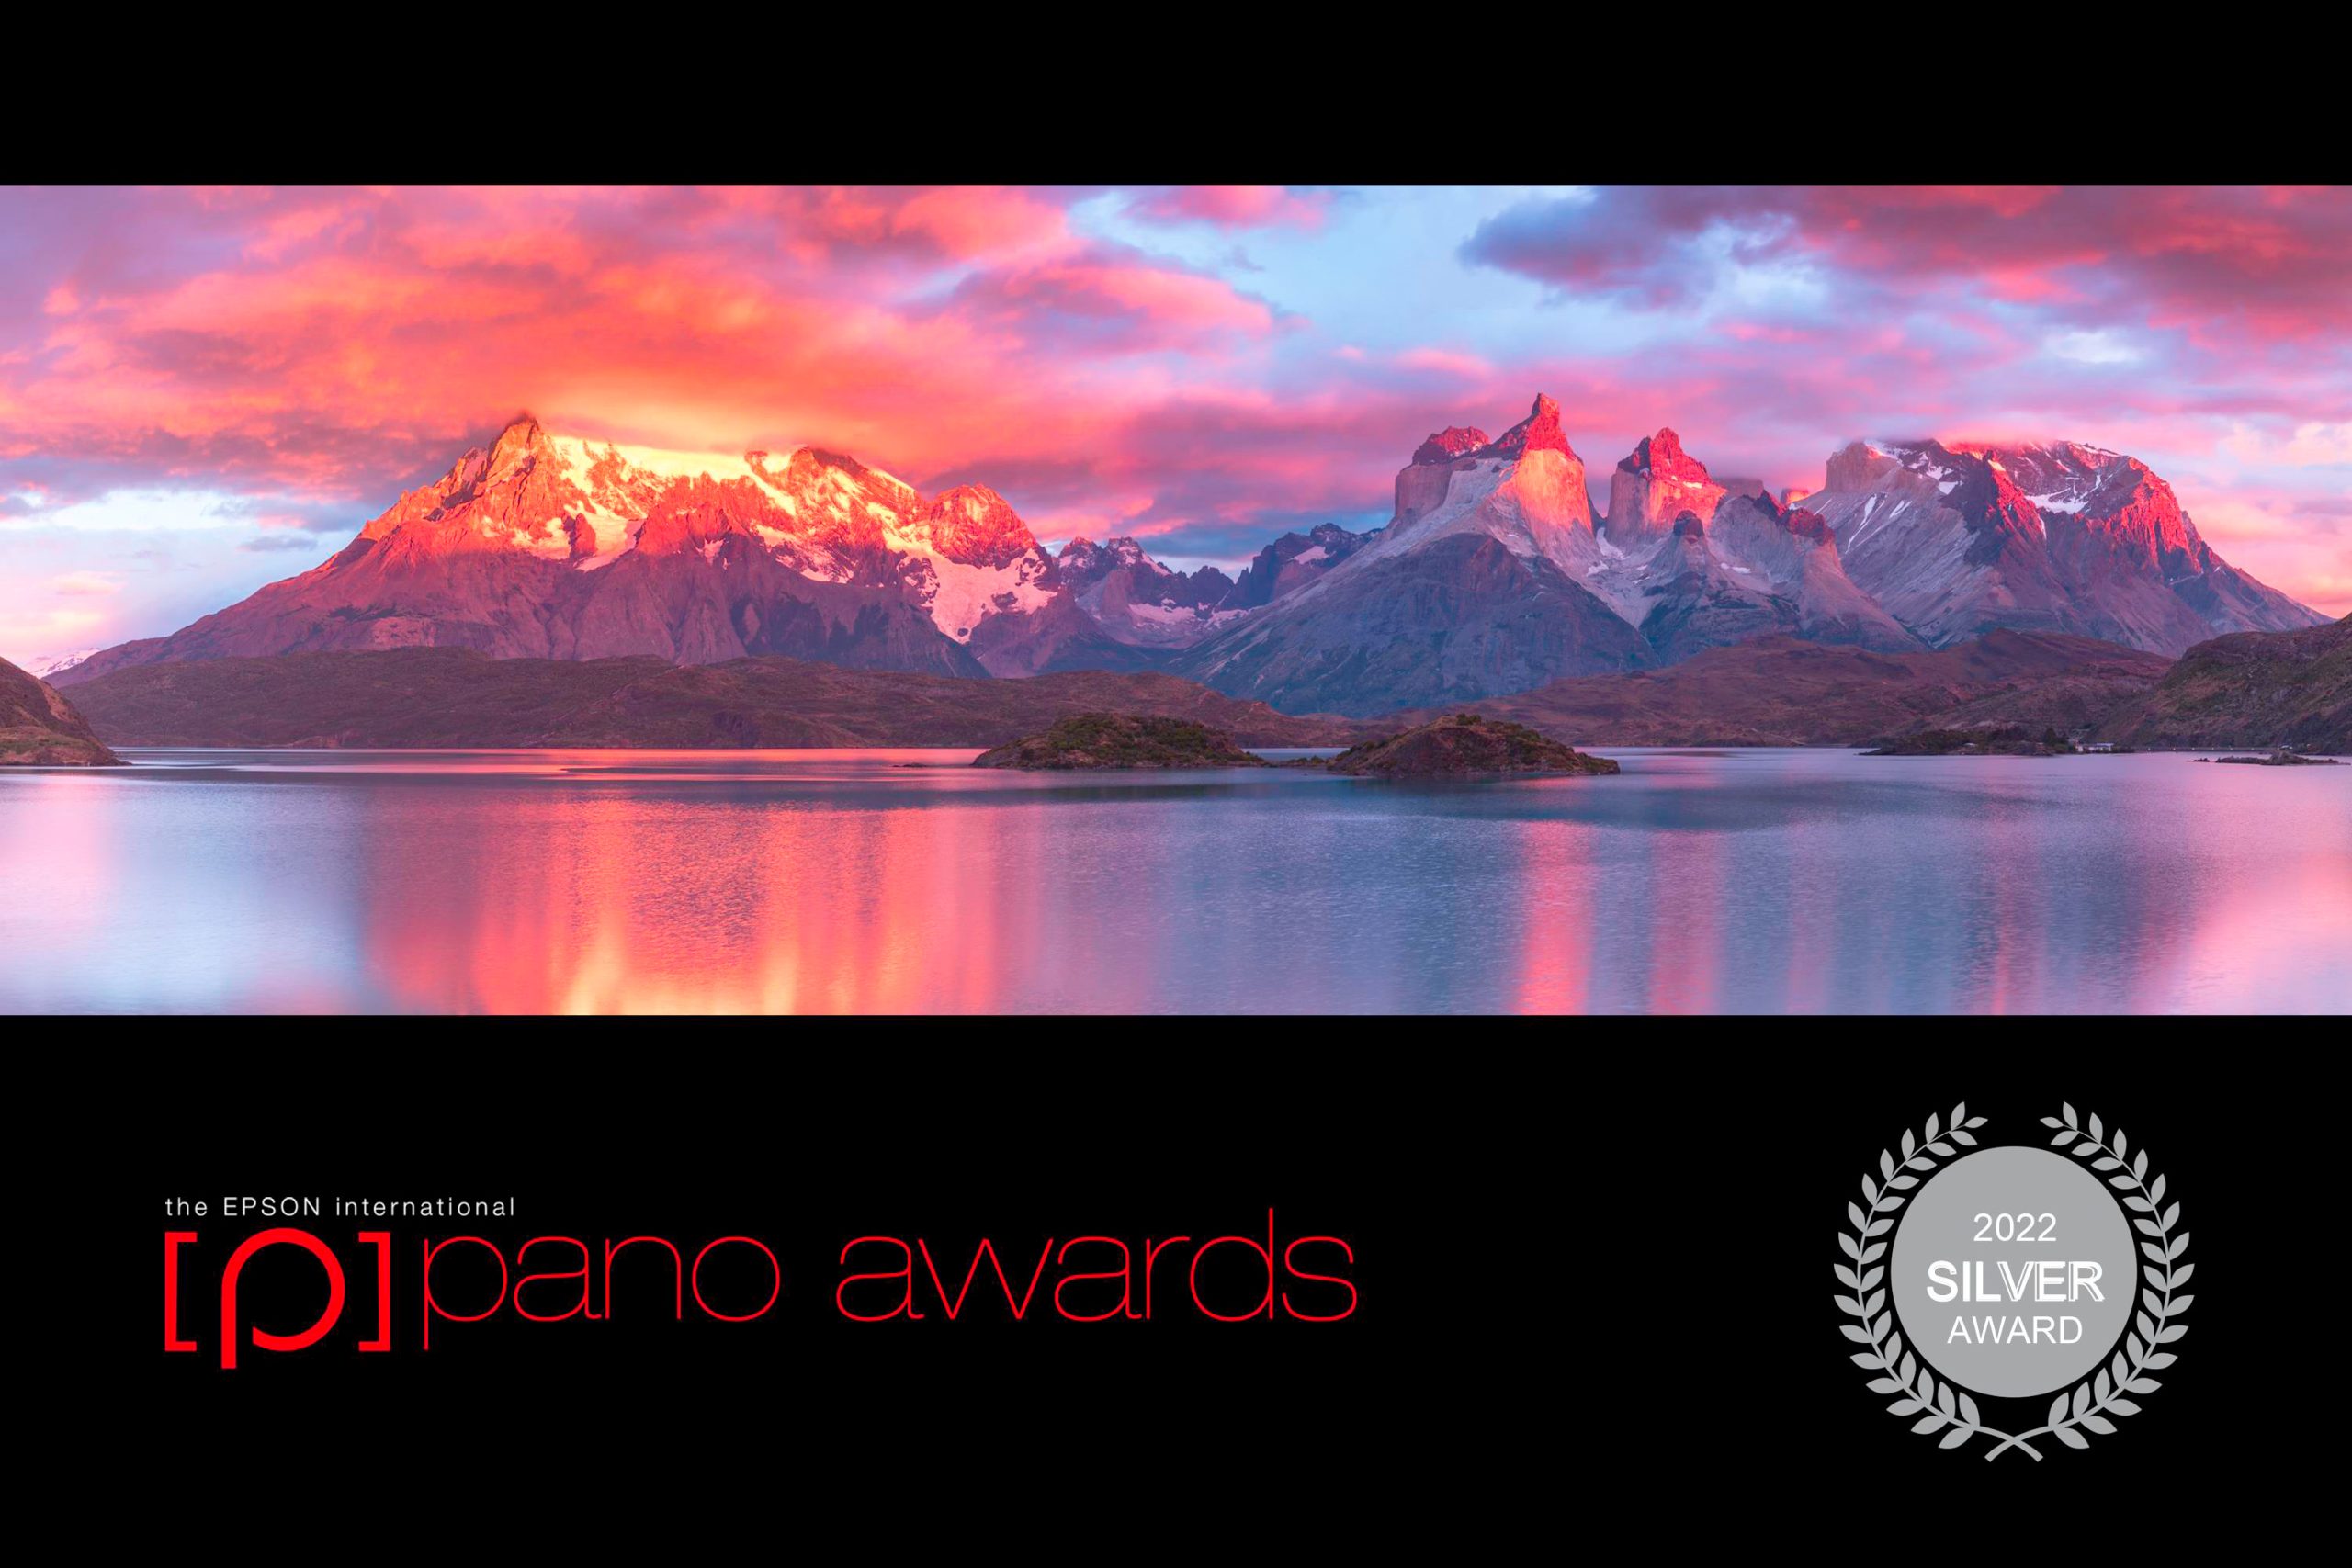 2022 Epson Pano Awards Silver. Torres del Paine.